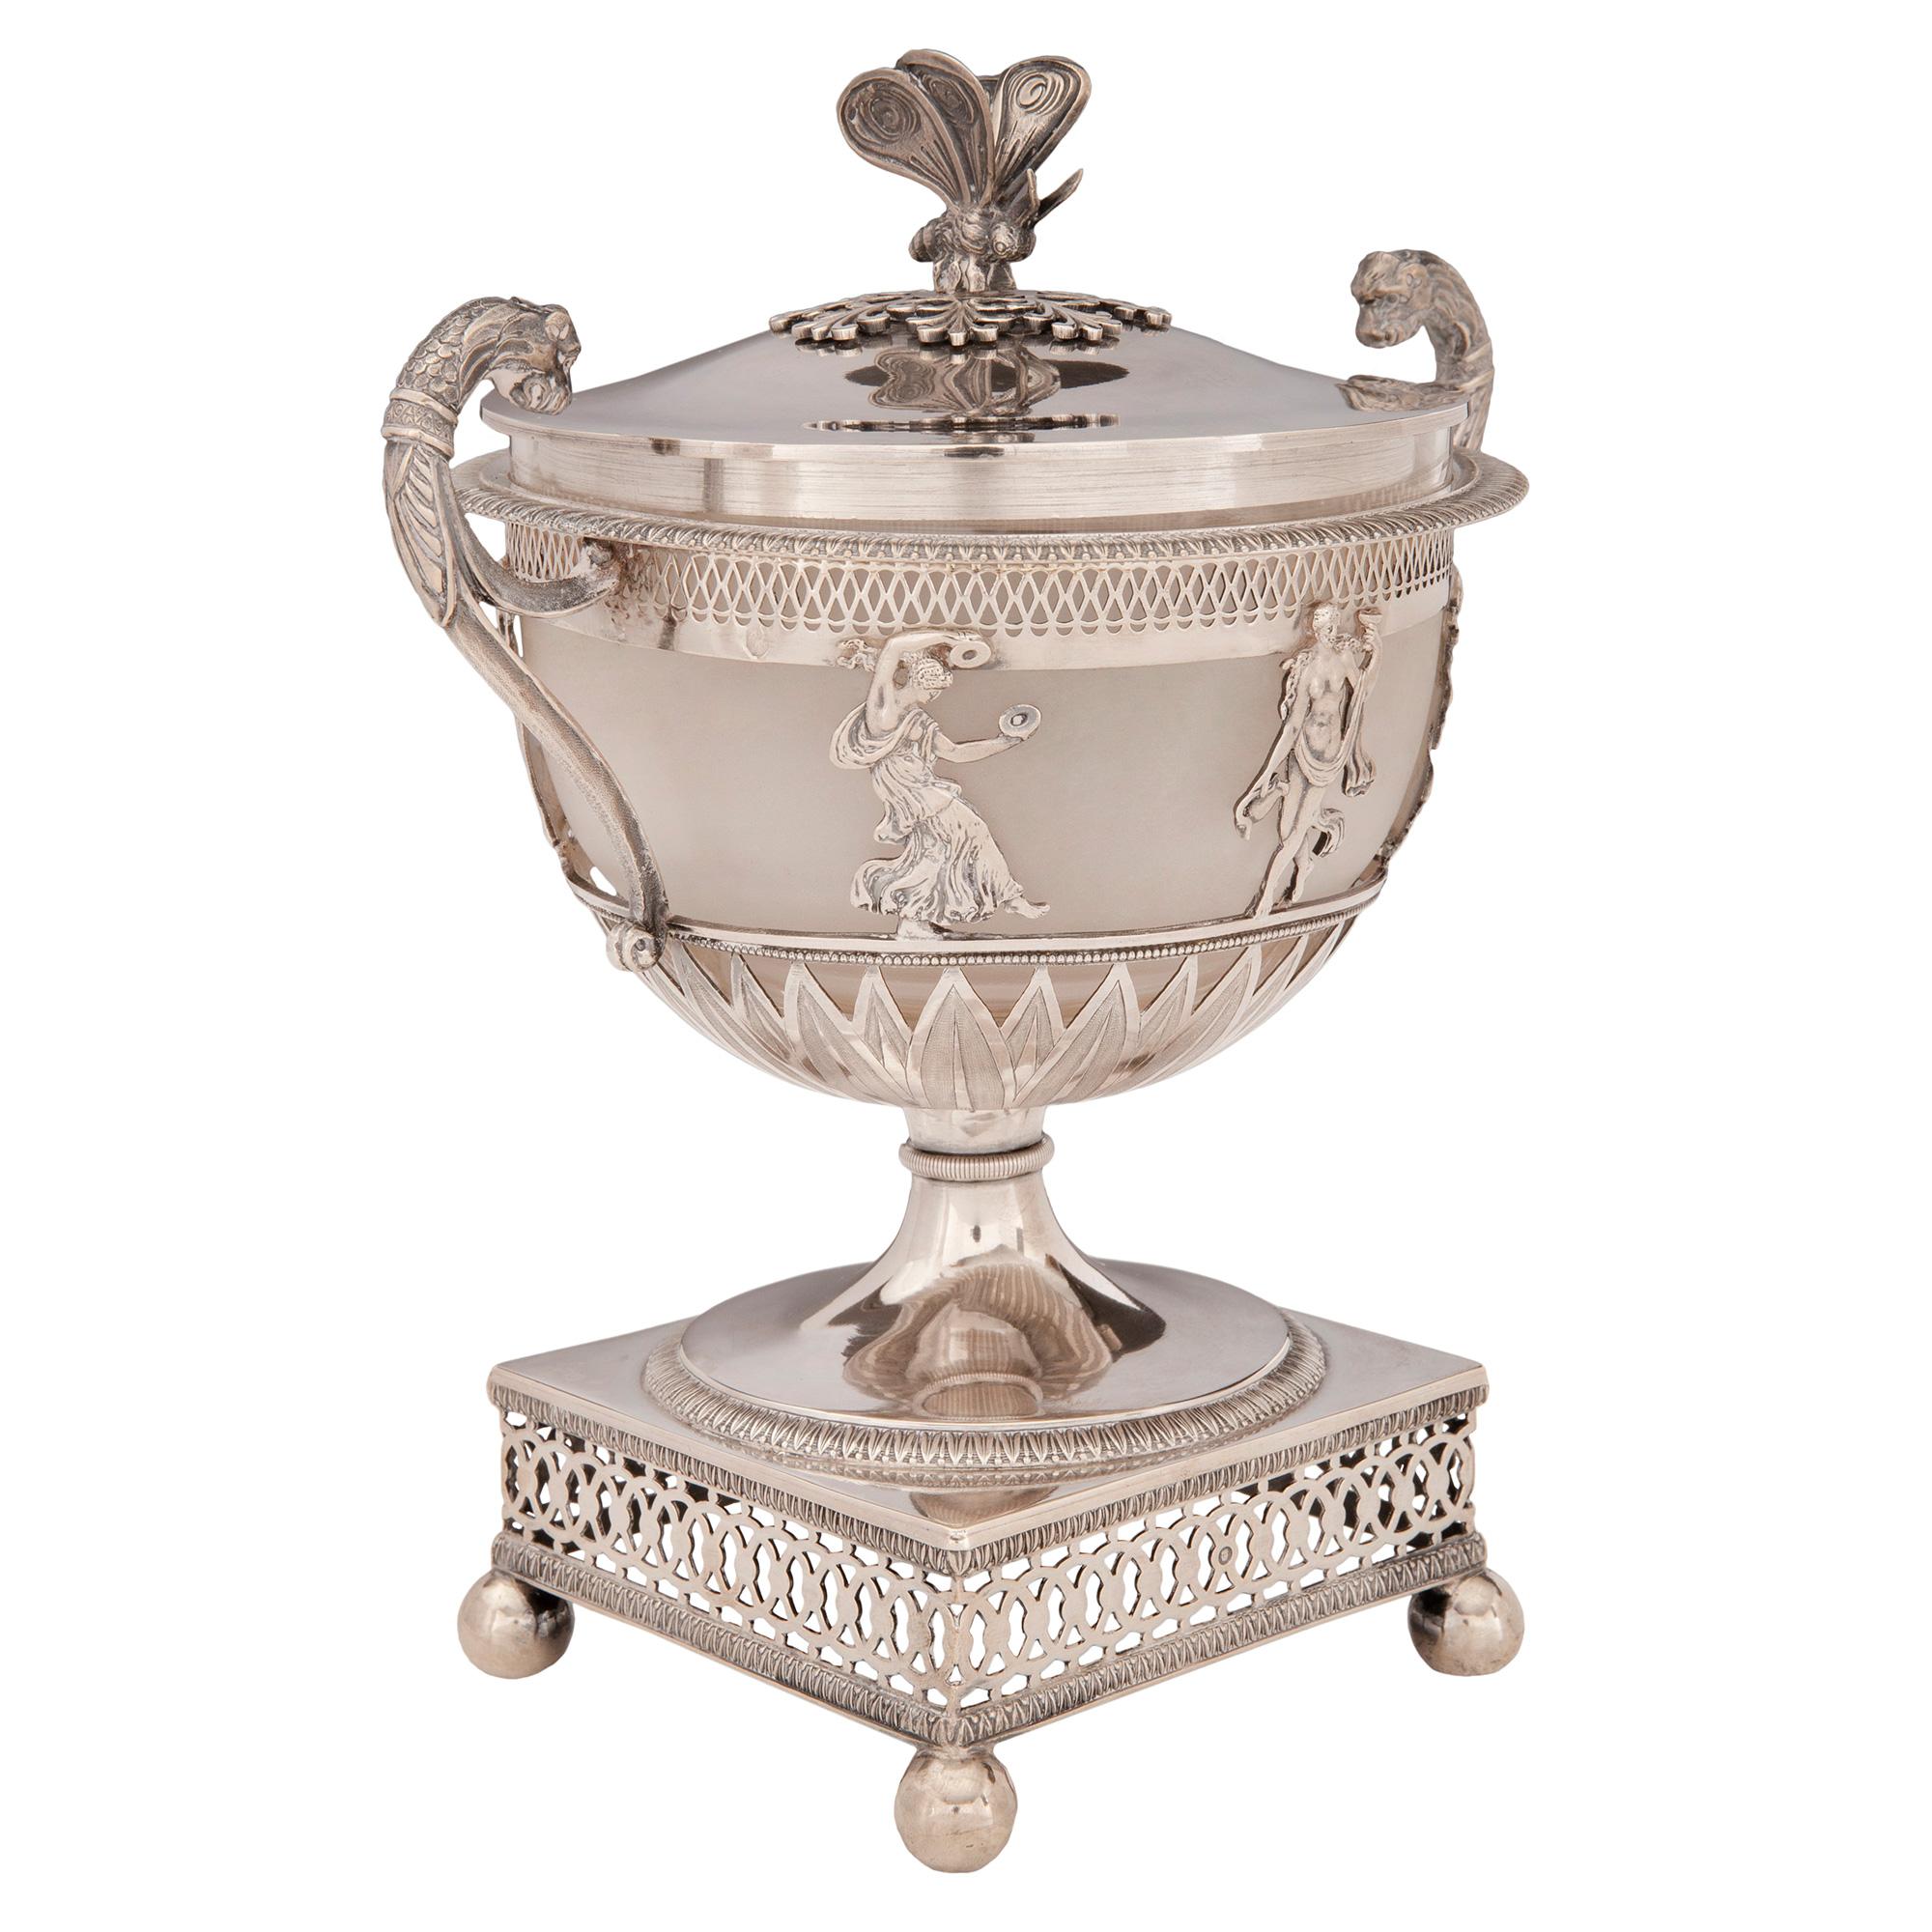 An elegant French early 19th century 1st Empire period signed sterling silver lidded urn. The urn is raised by four ball feet below the lovely intricately pierced base decorated with interlocking geometric patterns and fine Coeur de Rai wrap around